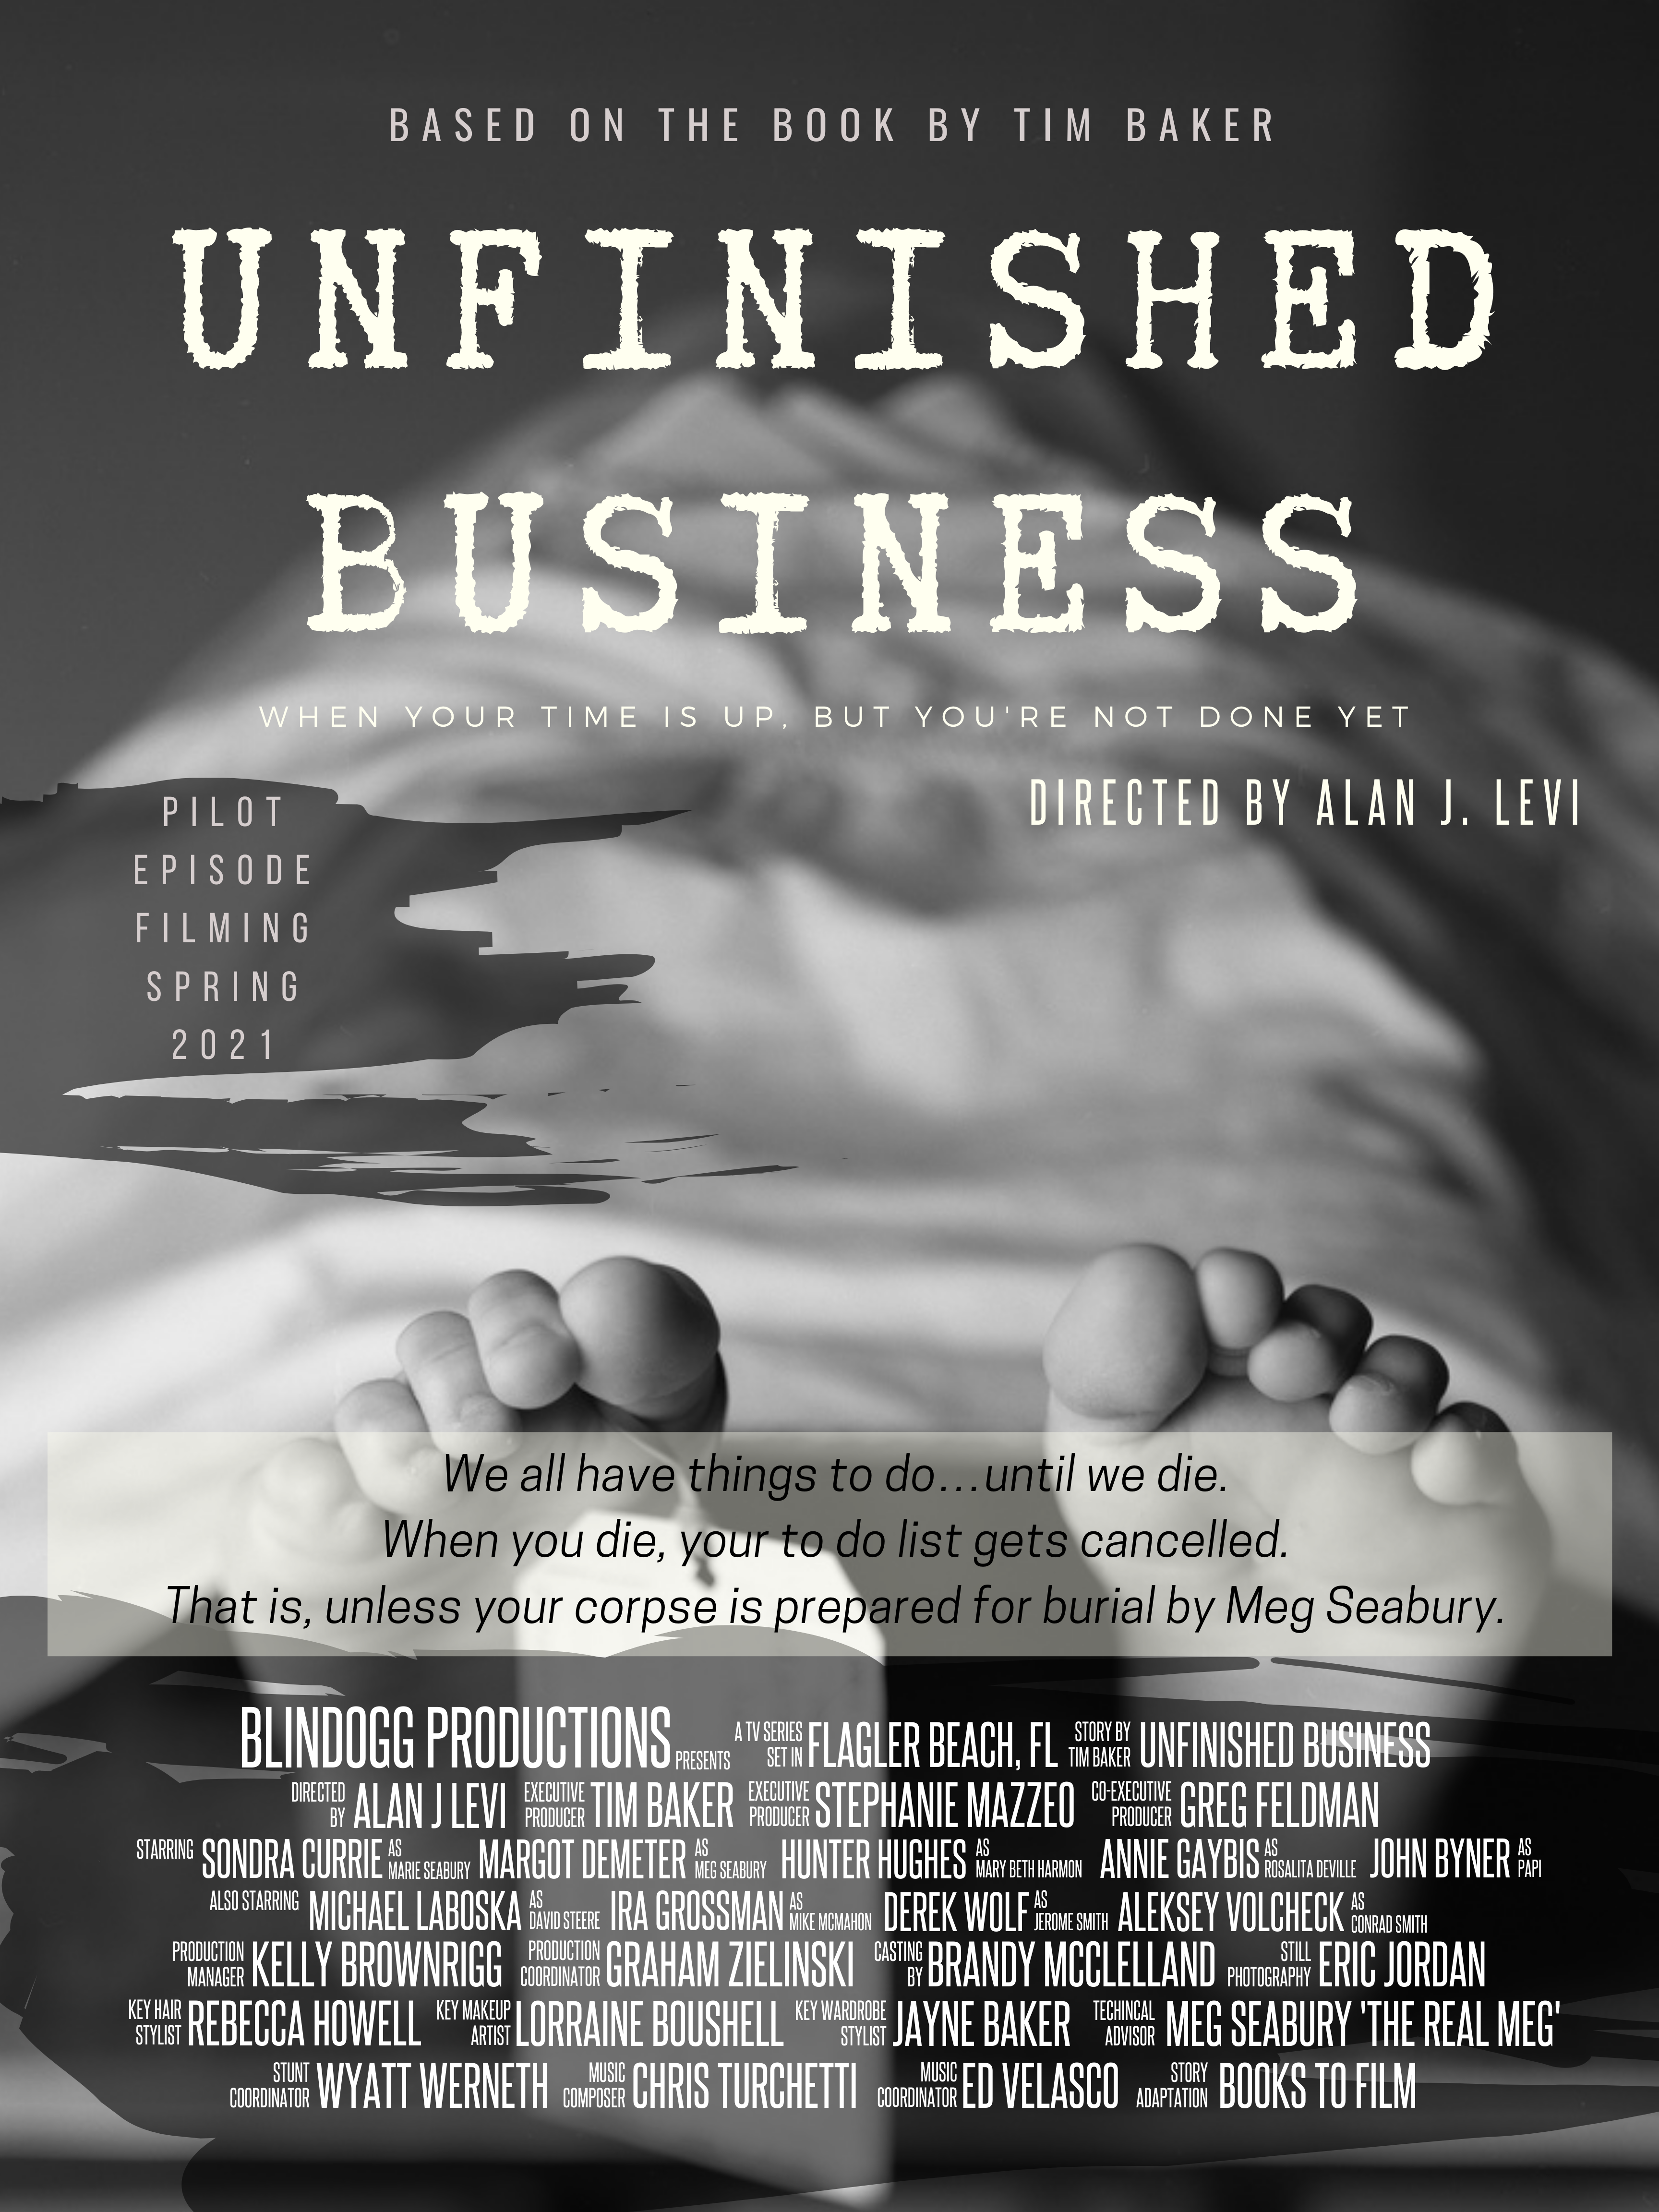 UNFINISHED BUSINESS